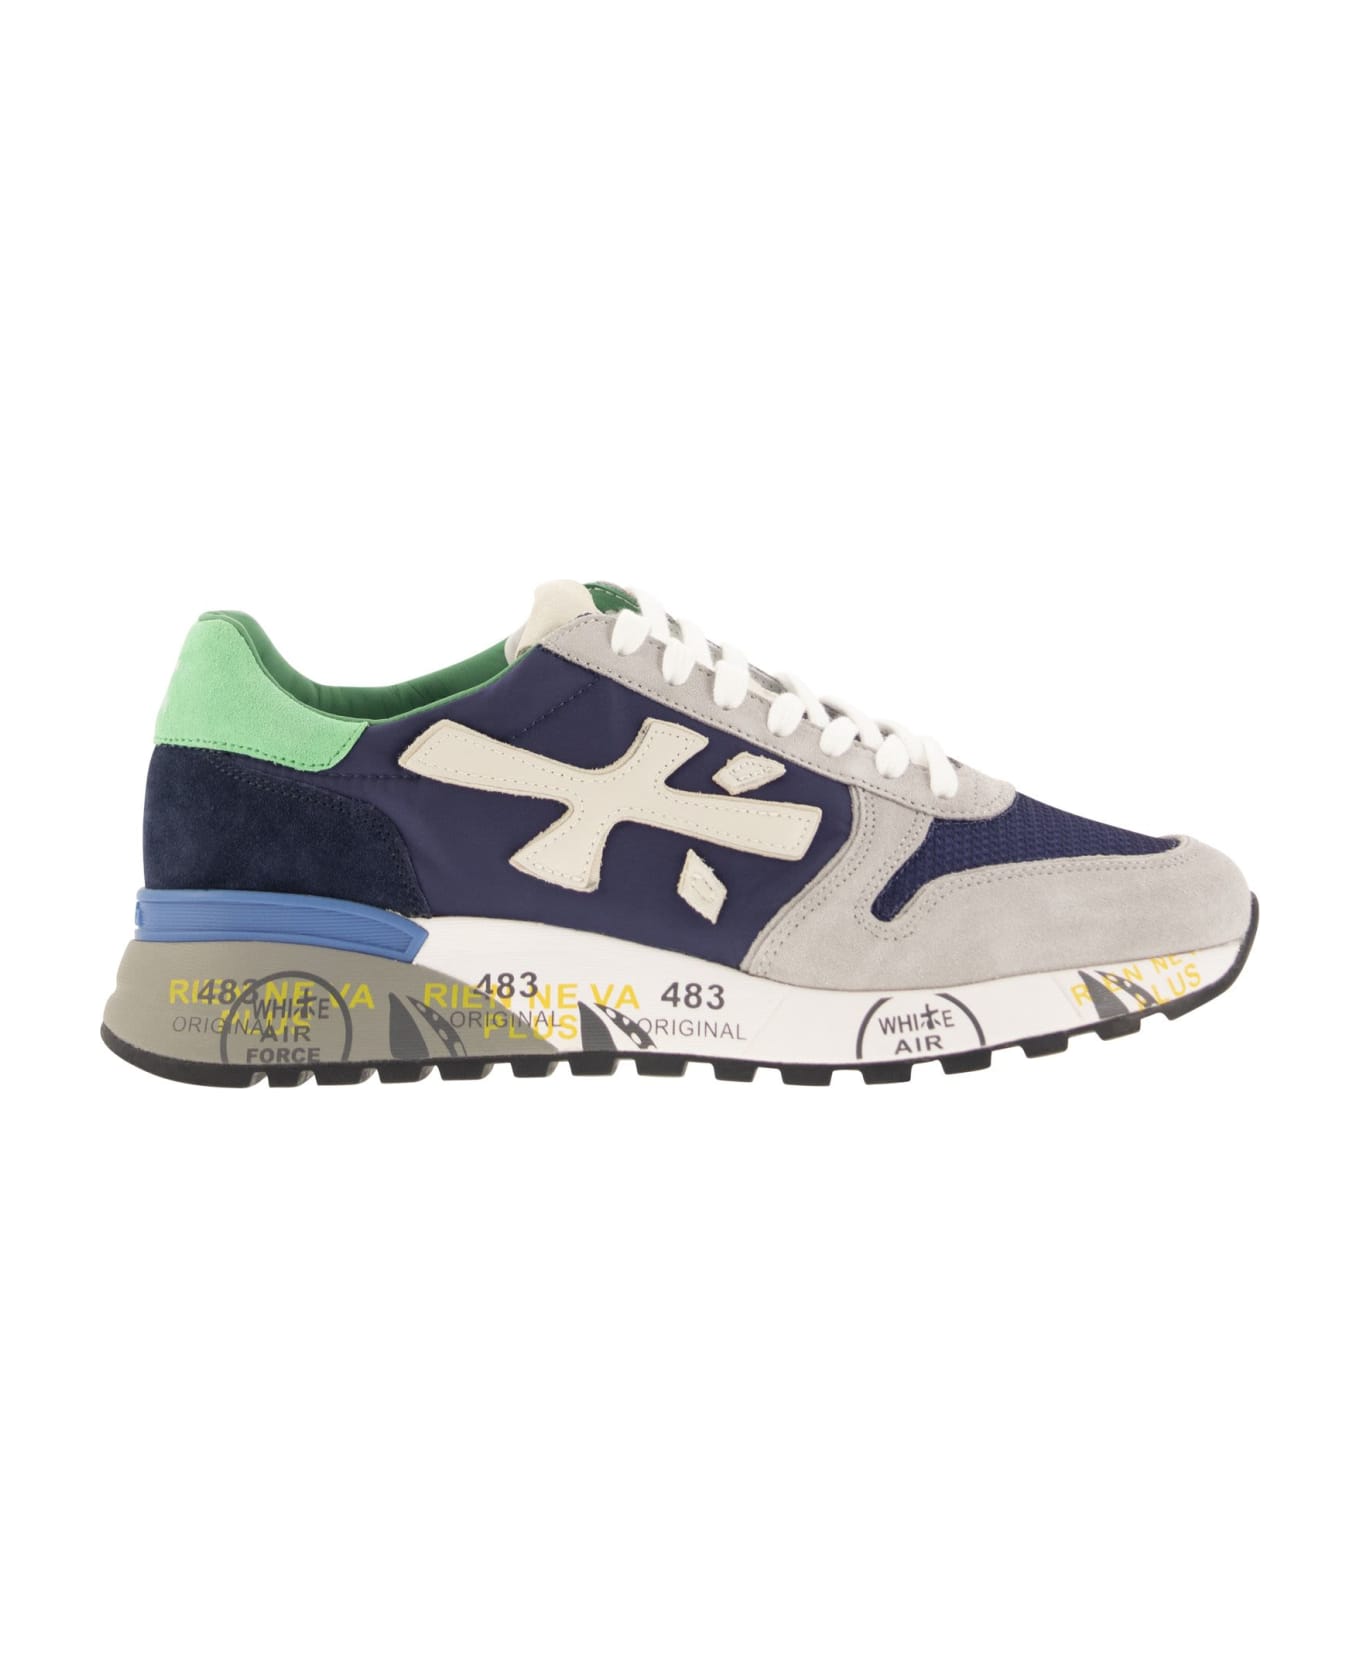 Premiata Mick Sneakers In Blue Suede And Fabric - Blue/green/grey スニーカー